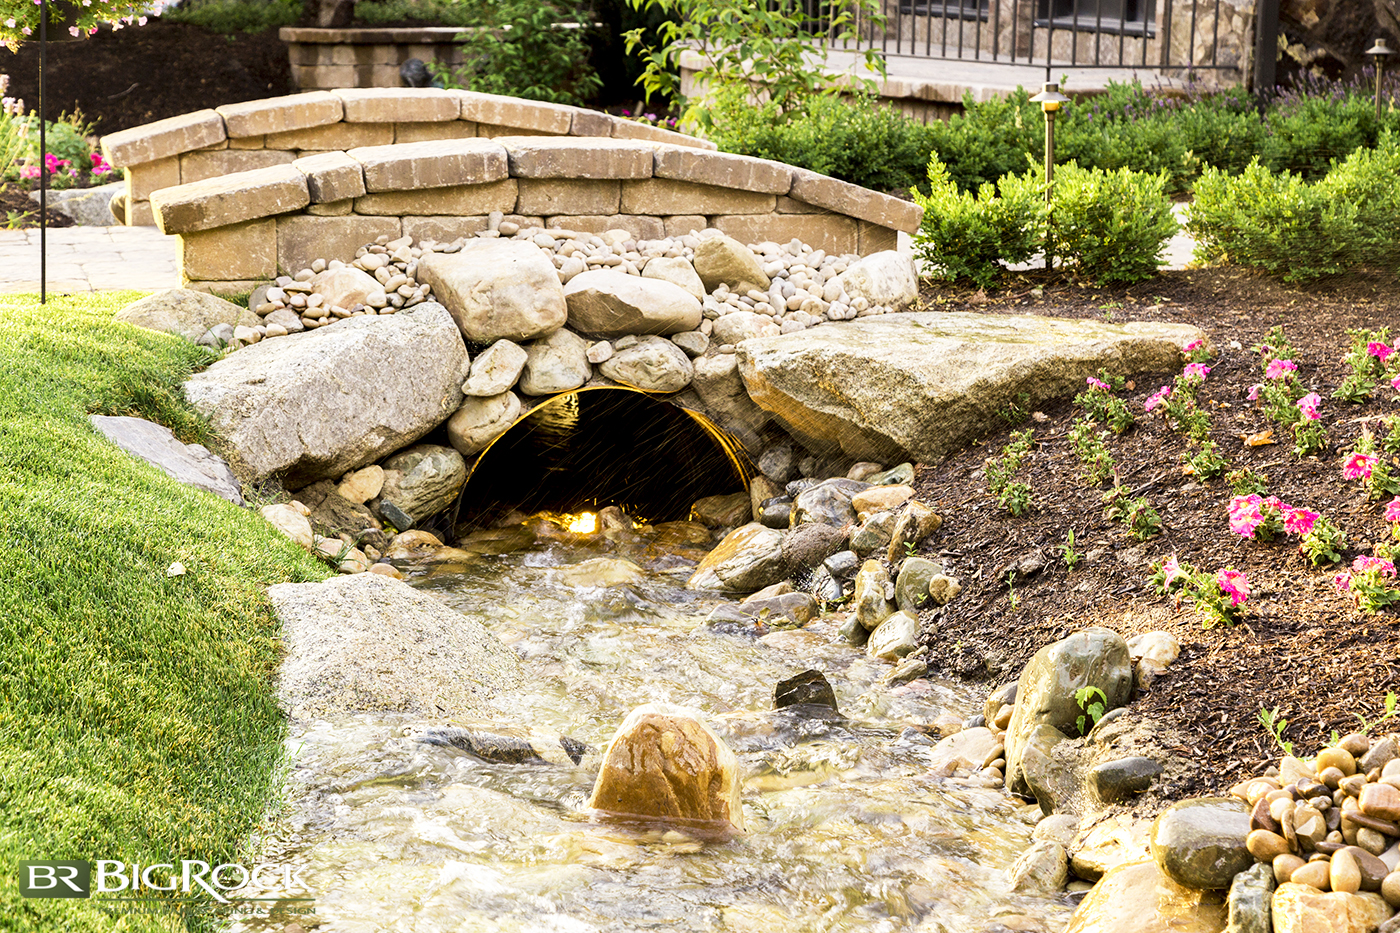 Big Rock Landscaping can design and install a natural creek with bridge so you can have nature running through your residential landscaping.